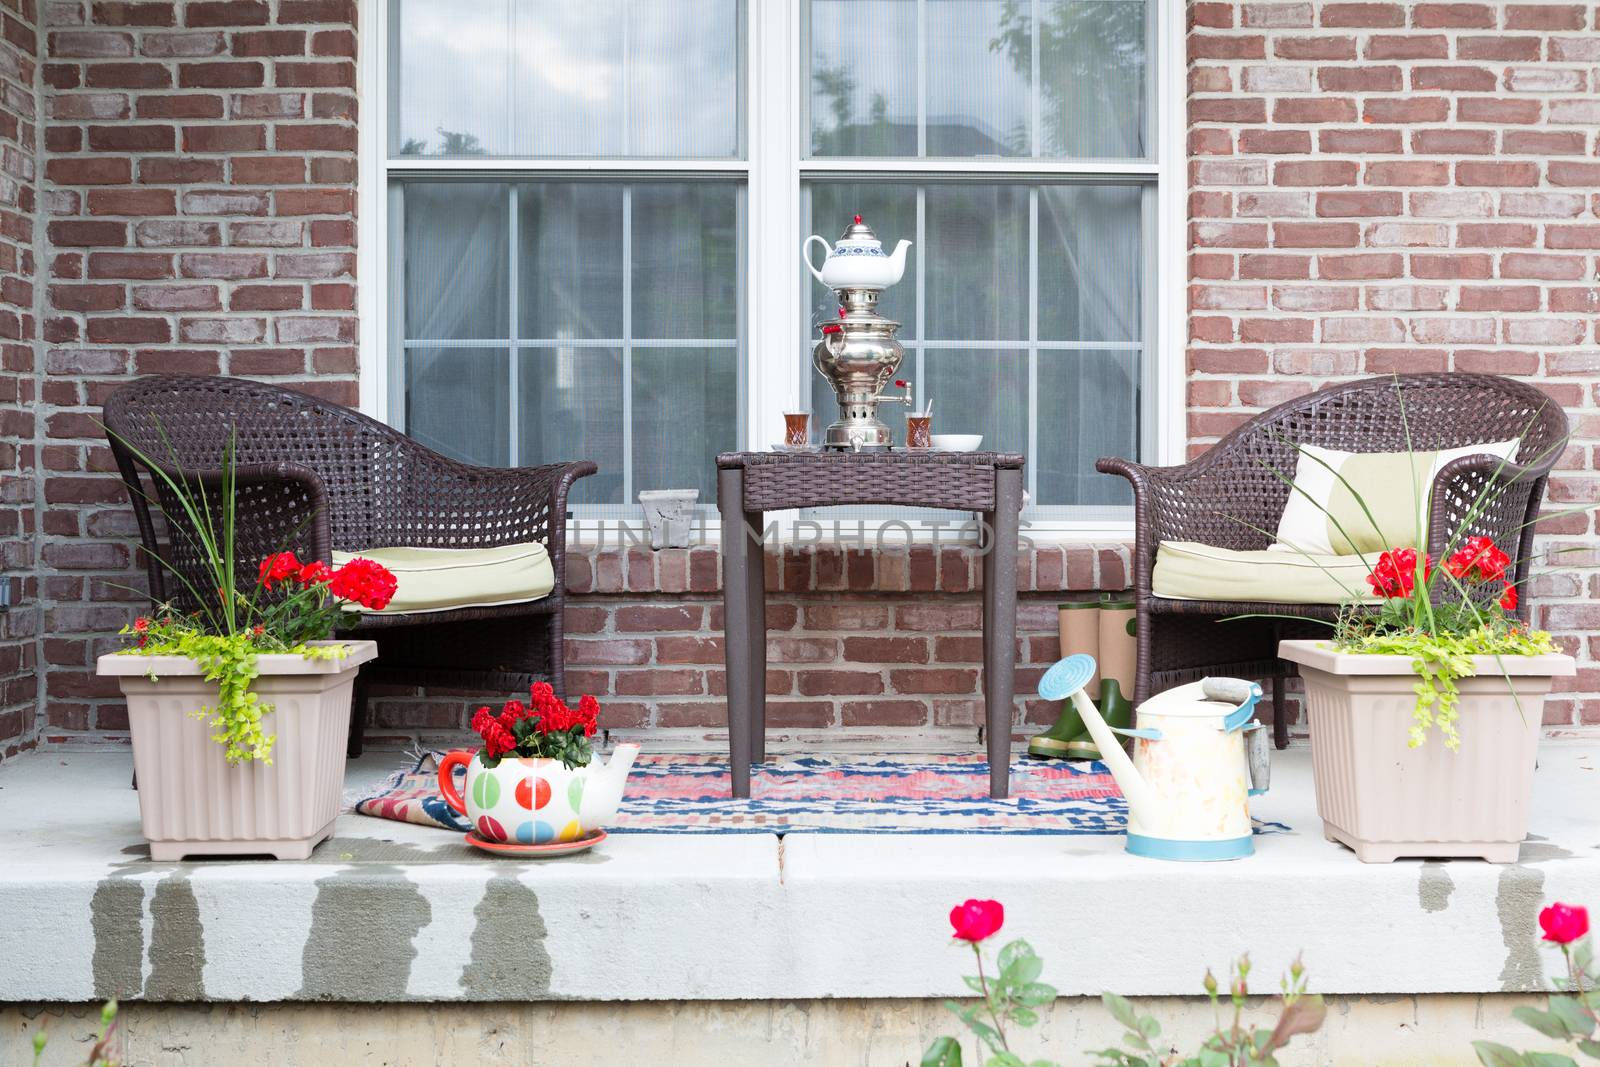 Wicker furniture on the patio with a samovar and tea cups ready for a relaxing tea break in the spring sunshine with pretty flowering potted plants